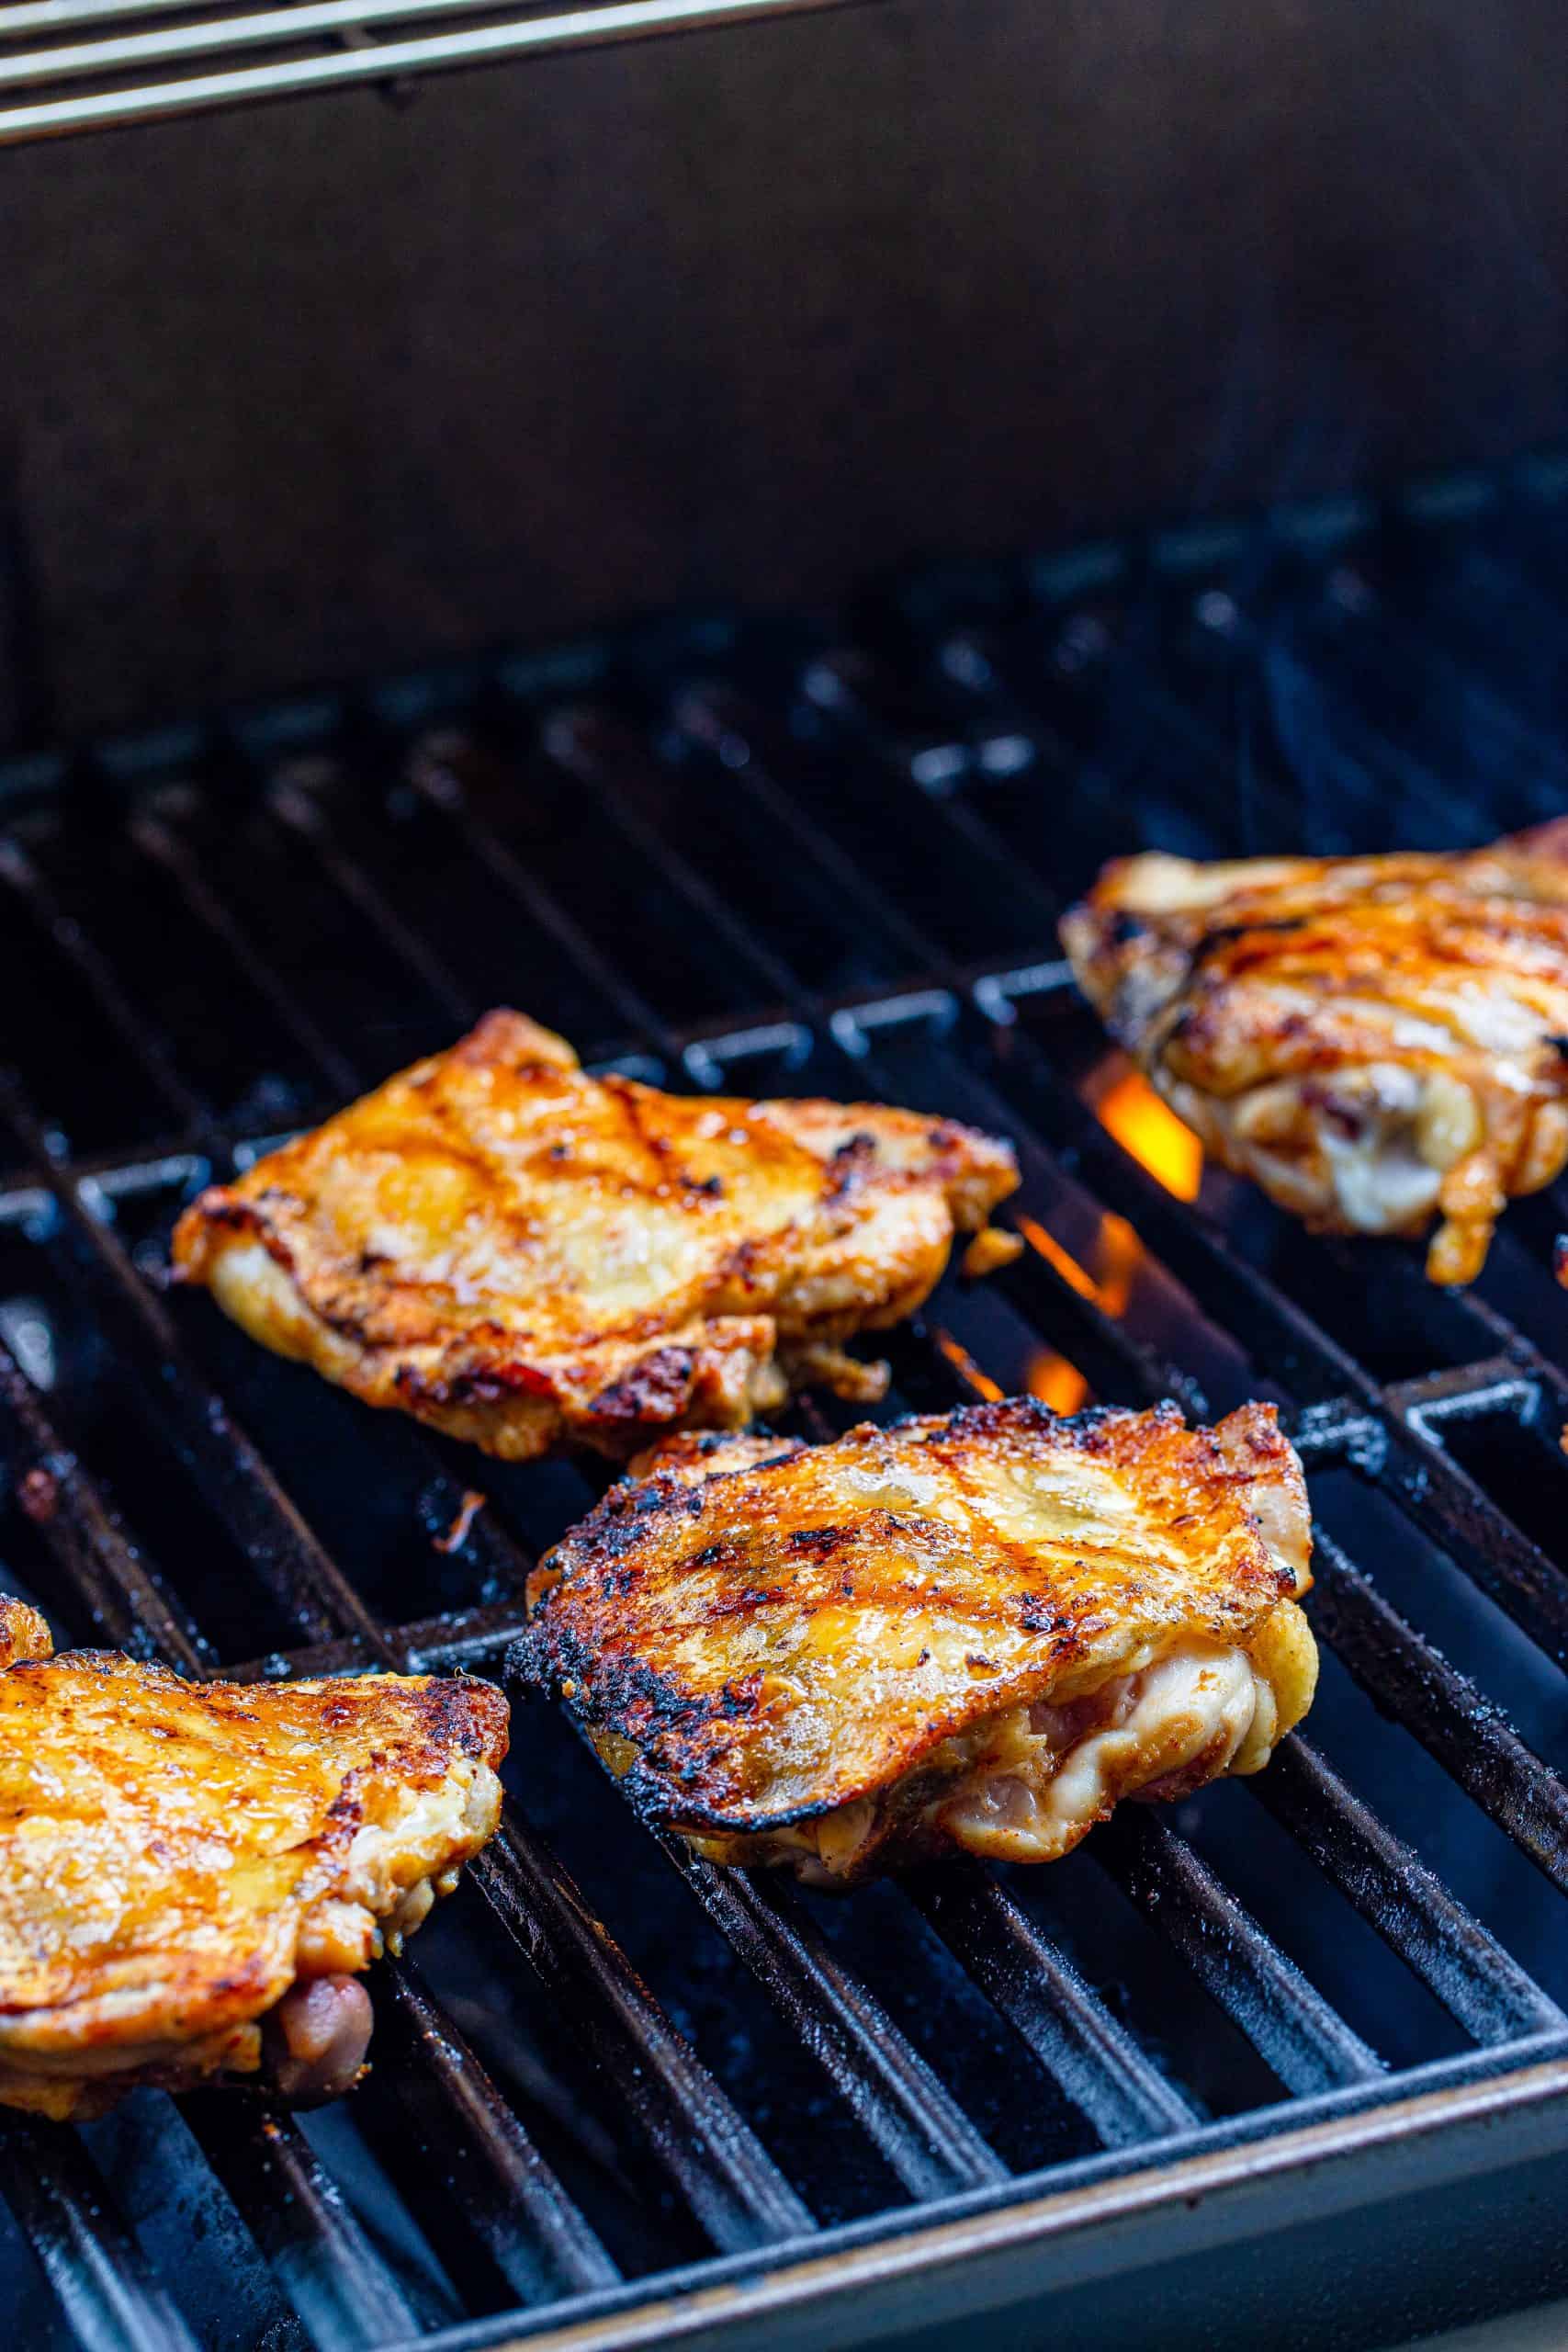 Chicken thighs getting brown on grill.